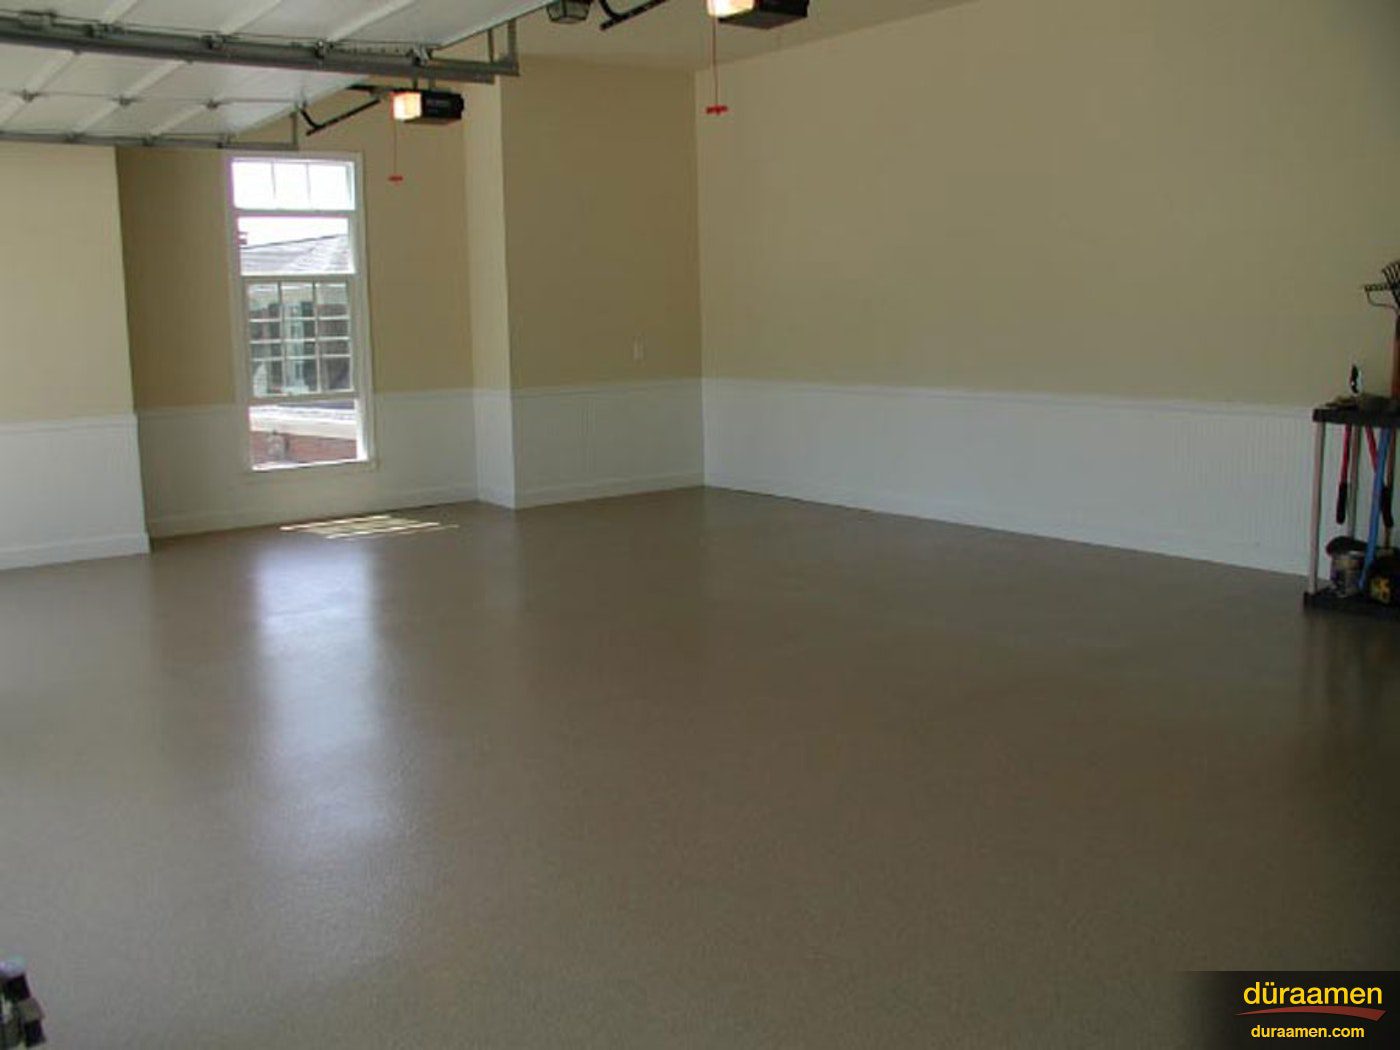 Endura is a professional resin chip epoxy garage flooring system that last much longer and resists wear and tear much better than store bought kitsnbspEndura Epoxy Resin Chip Flooring in a Residential Garage | Duraamen Engineered Products Inc